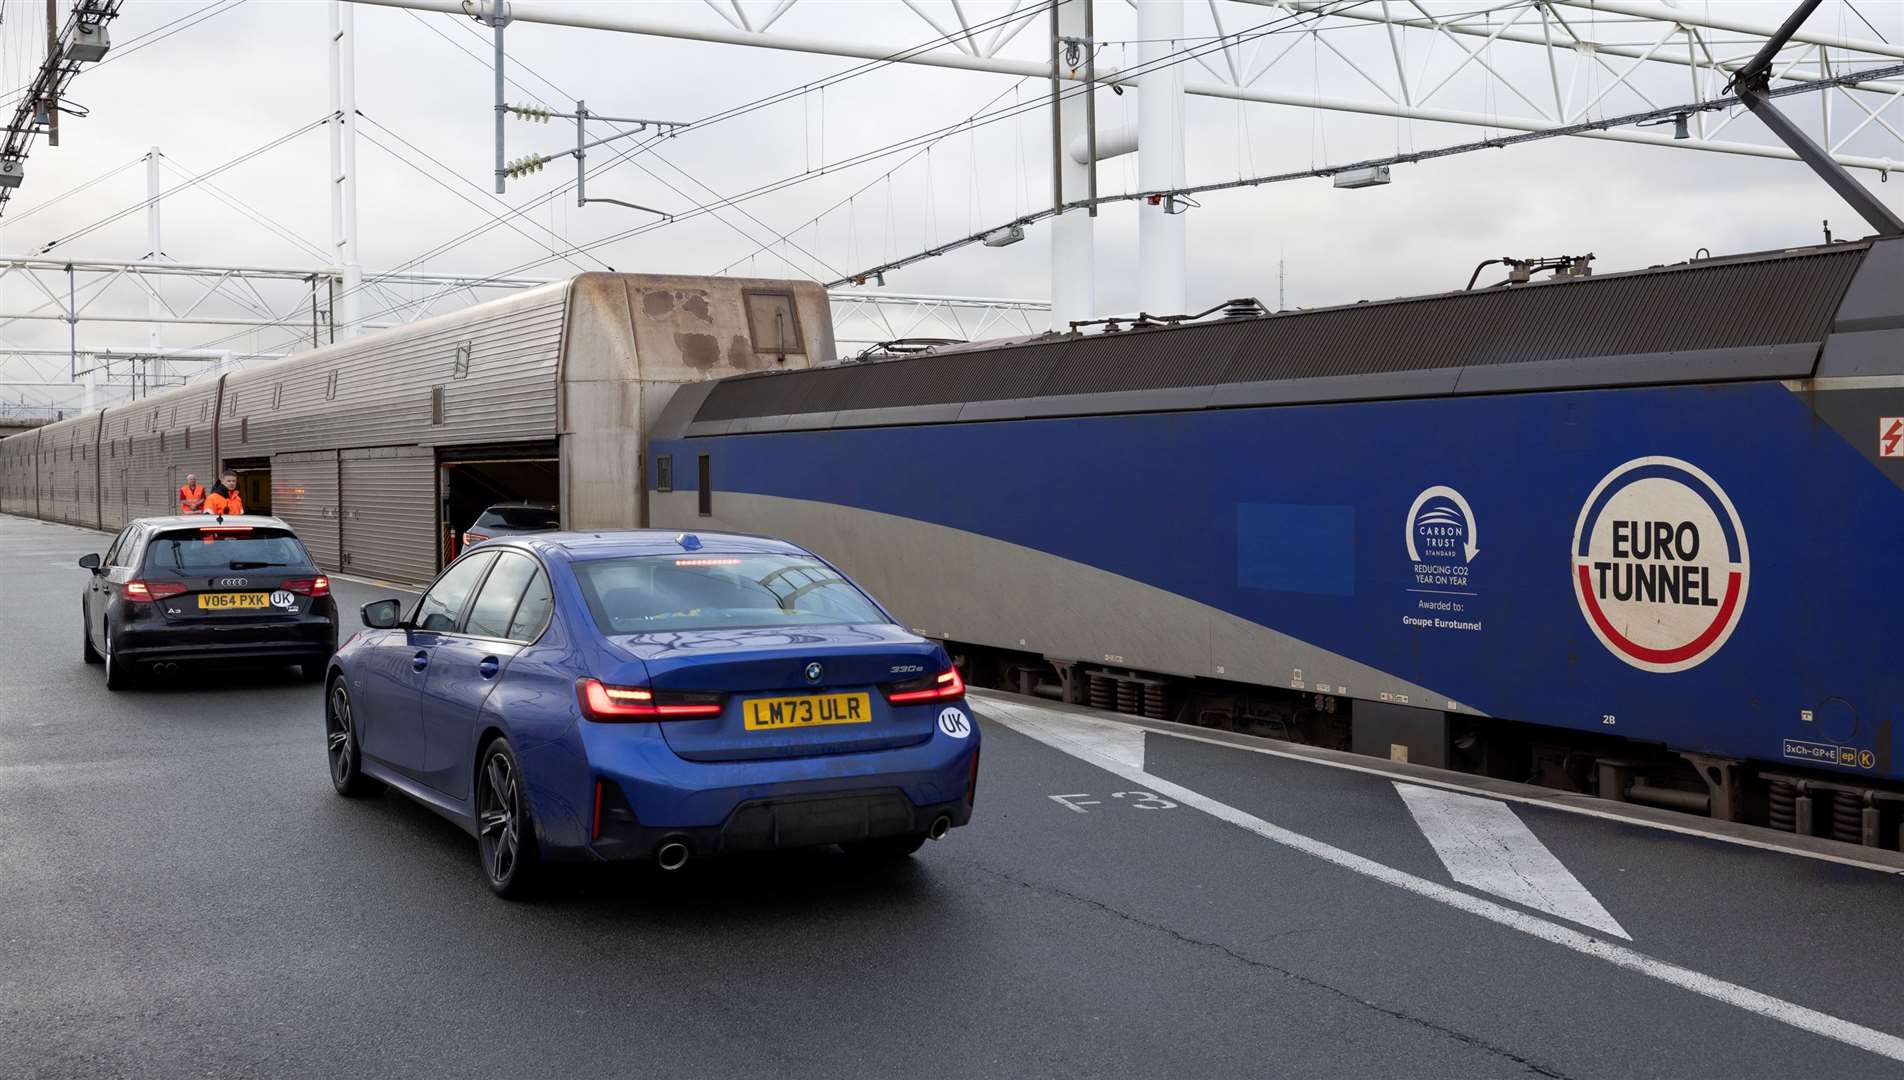 Eurotunnel parent company Getlink says it is confident the processes it has put in place will limit delays